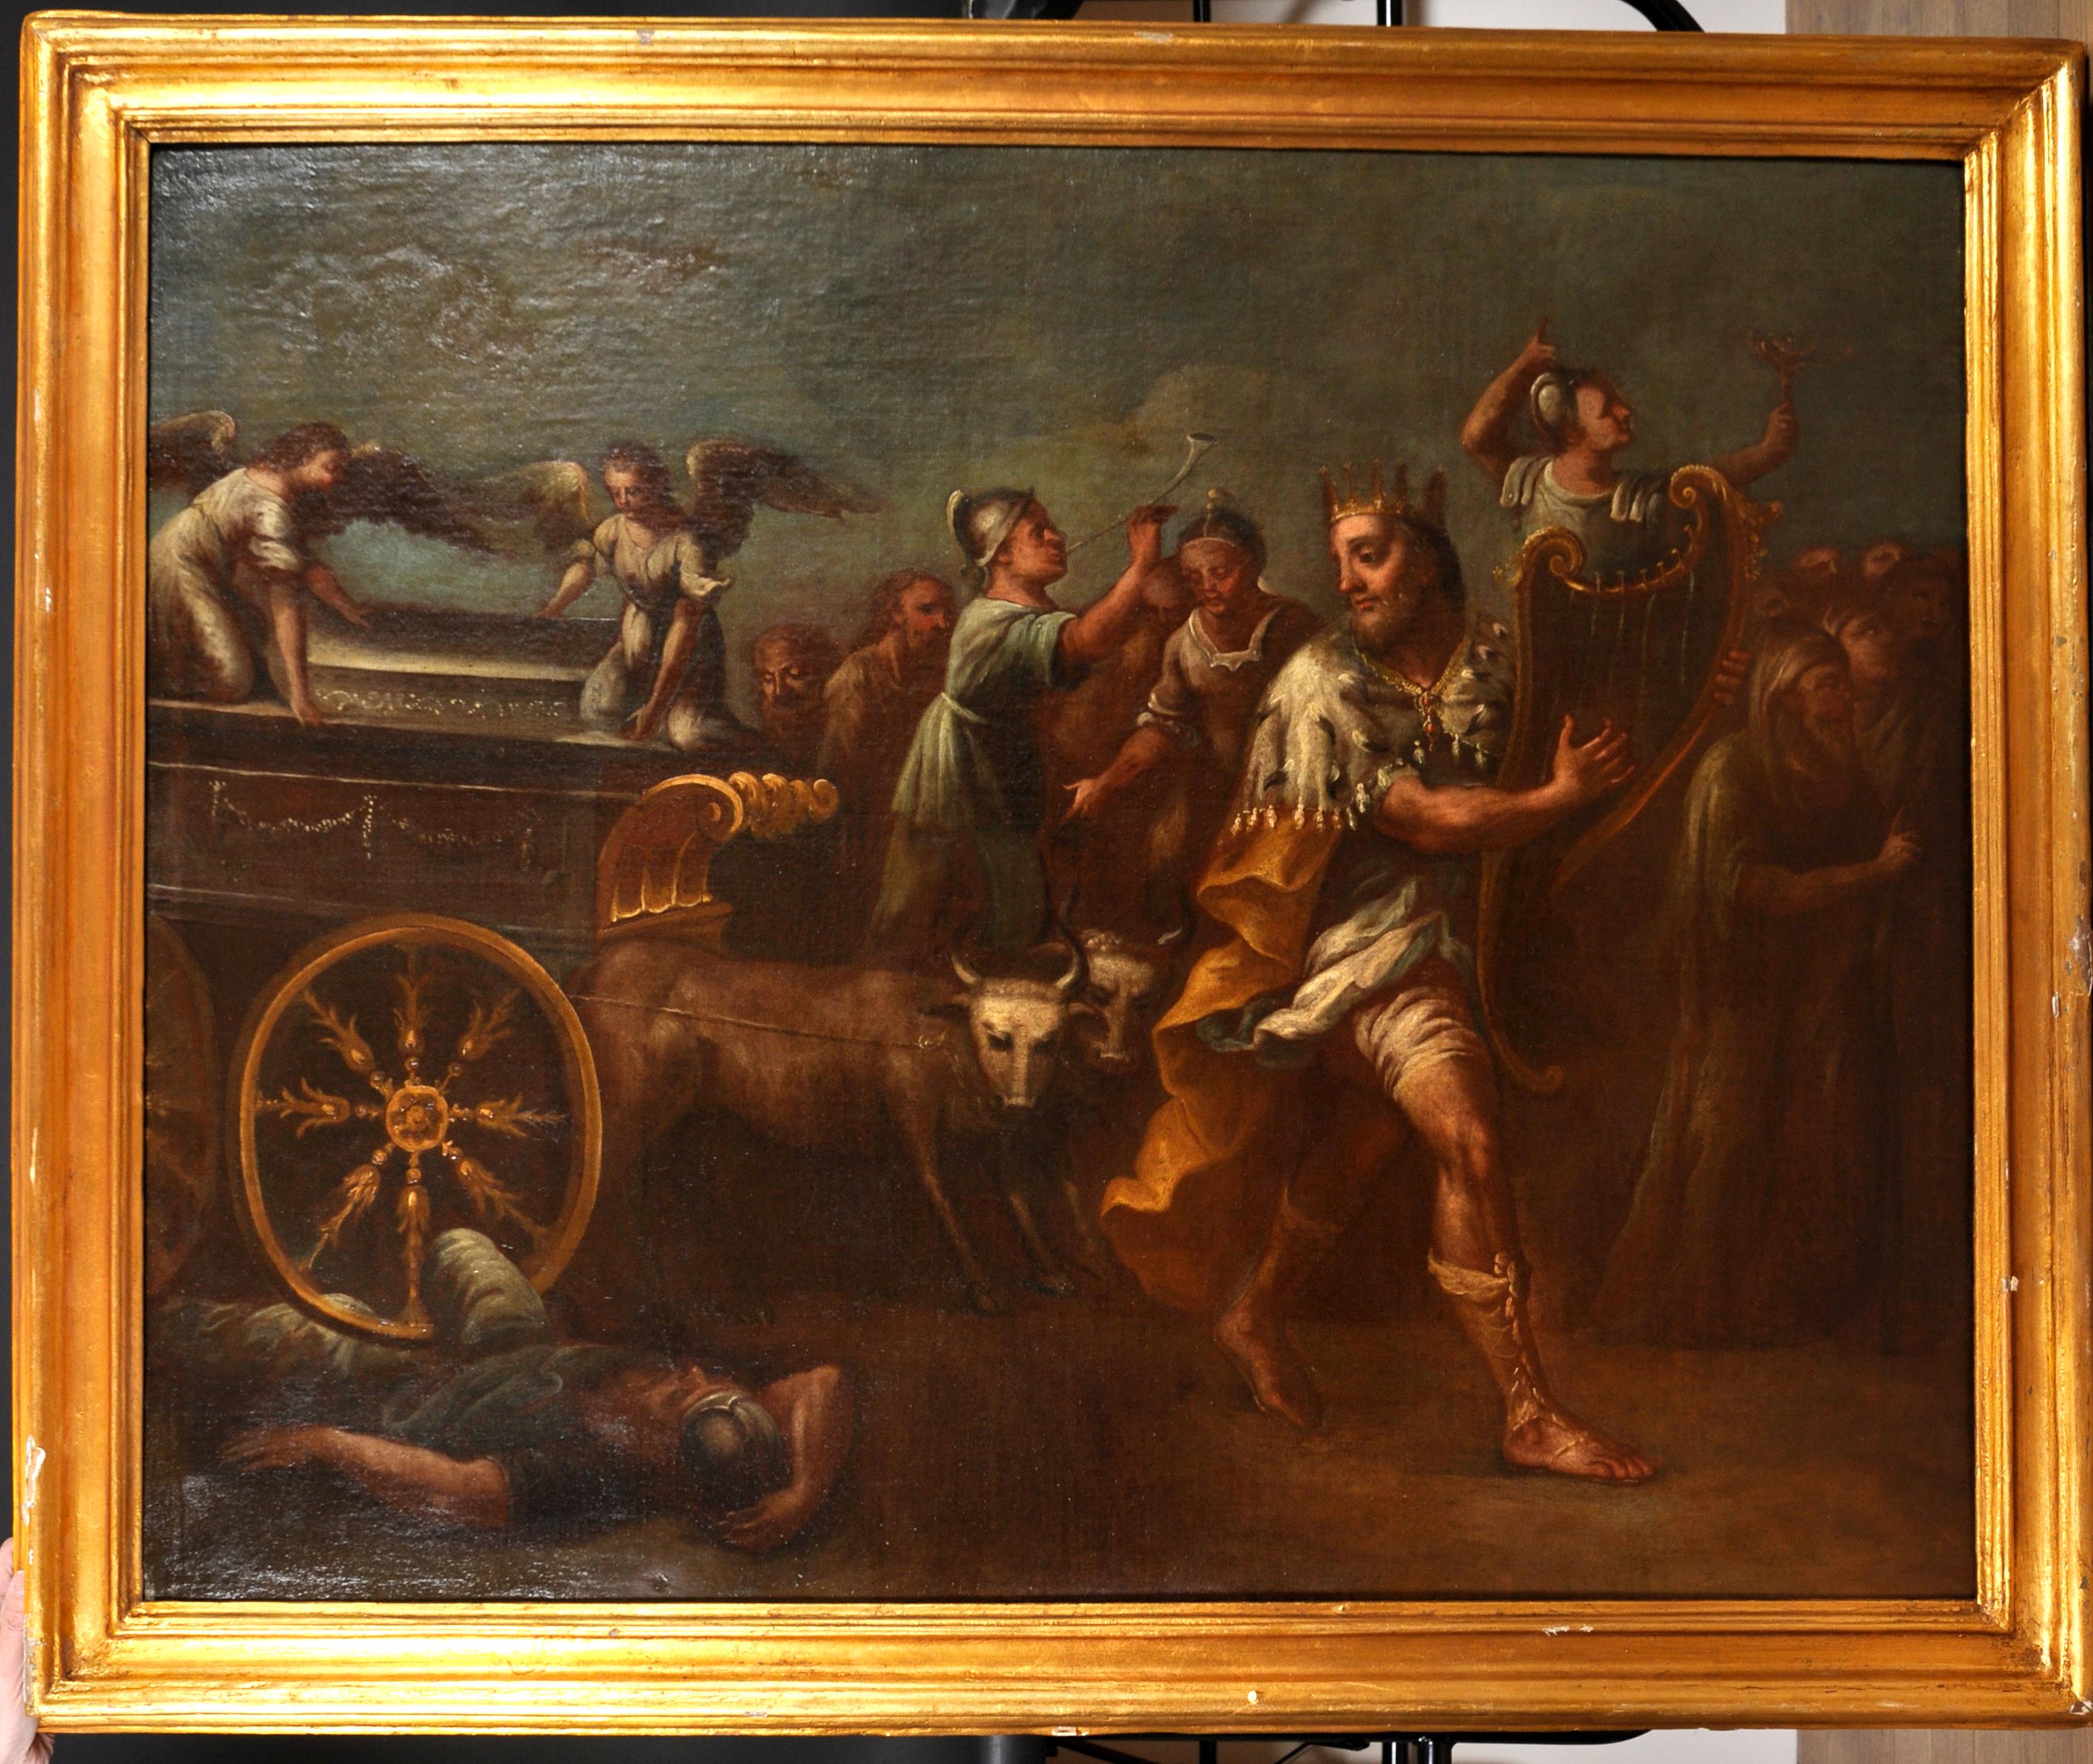 Huge 17th Century Italian Old Master painting The Return of the Ark of Covenant - Painting by 17th Italian Old Master